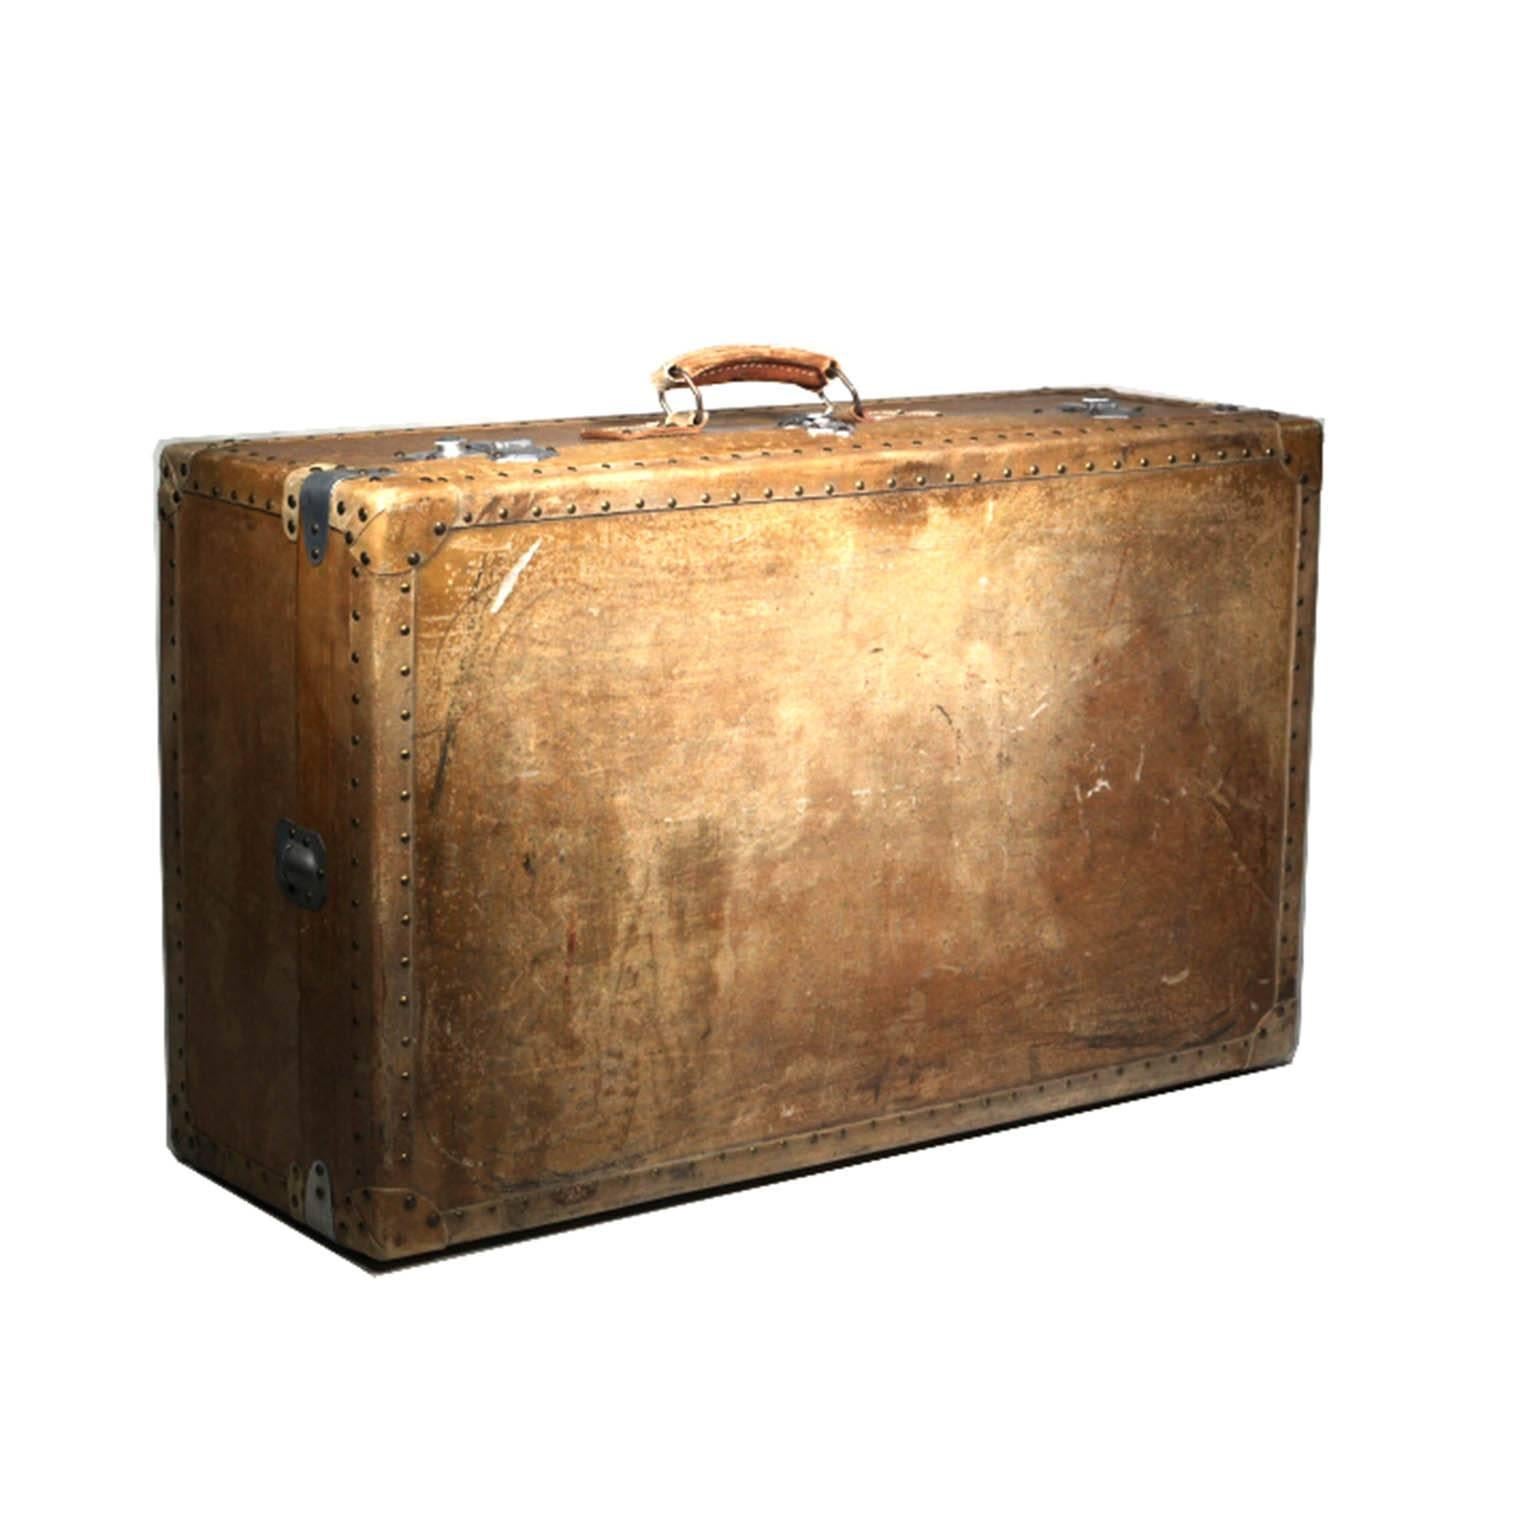 Early 20th century pigs vellum suitcase with removable inner tray, circa 1940s.